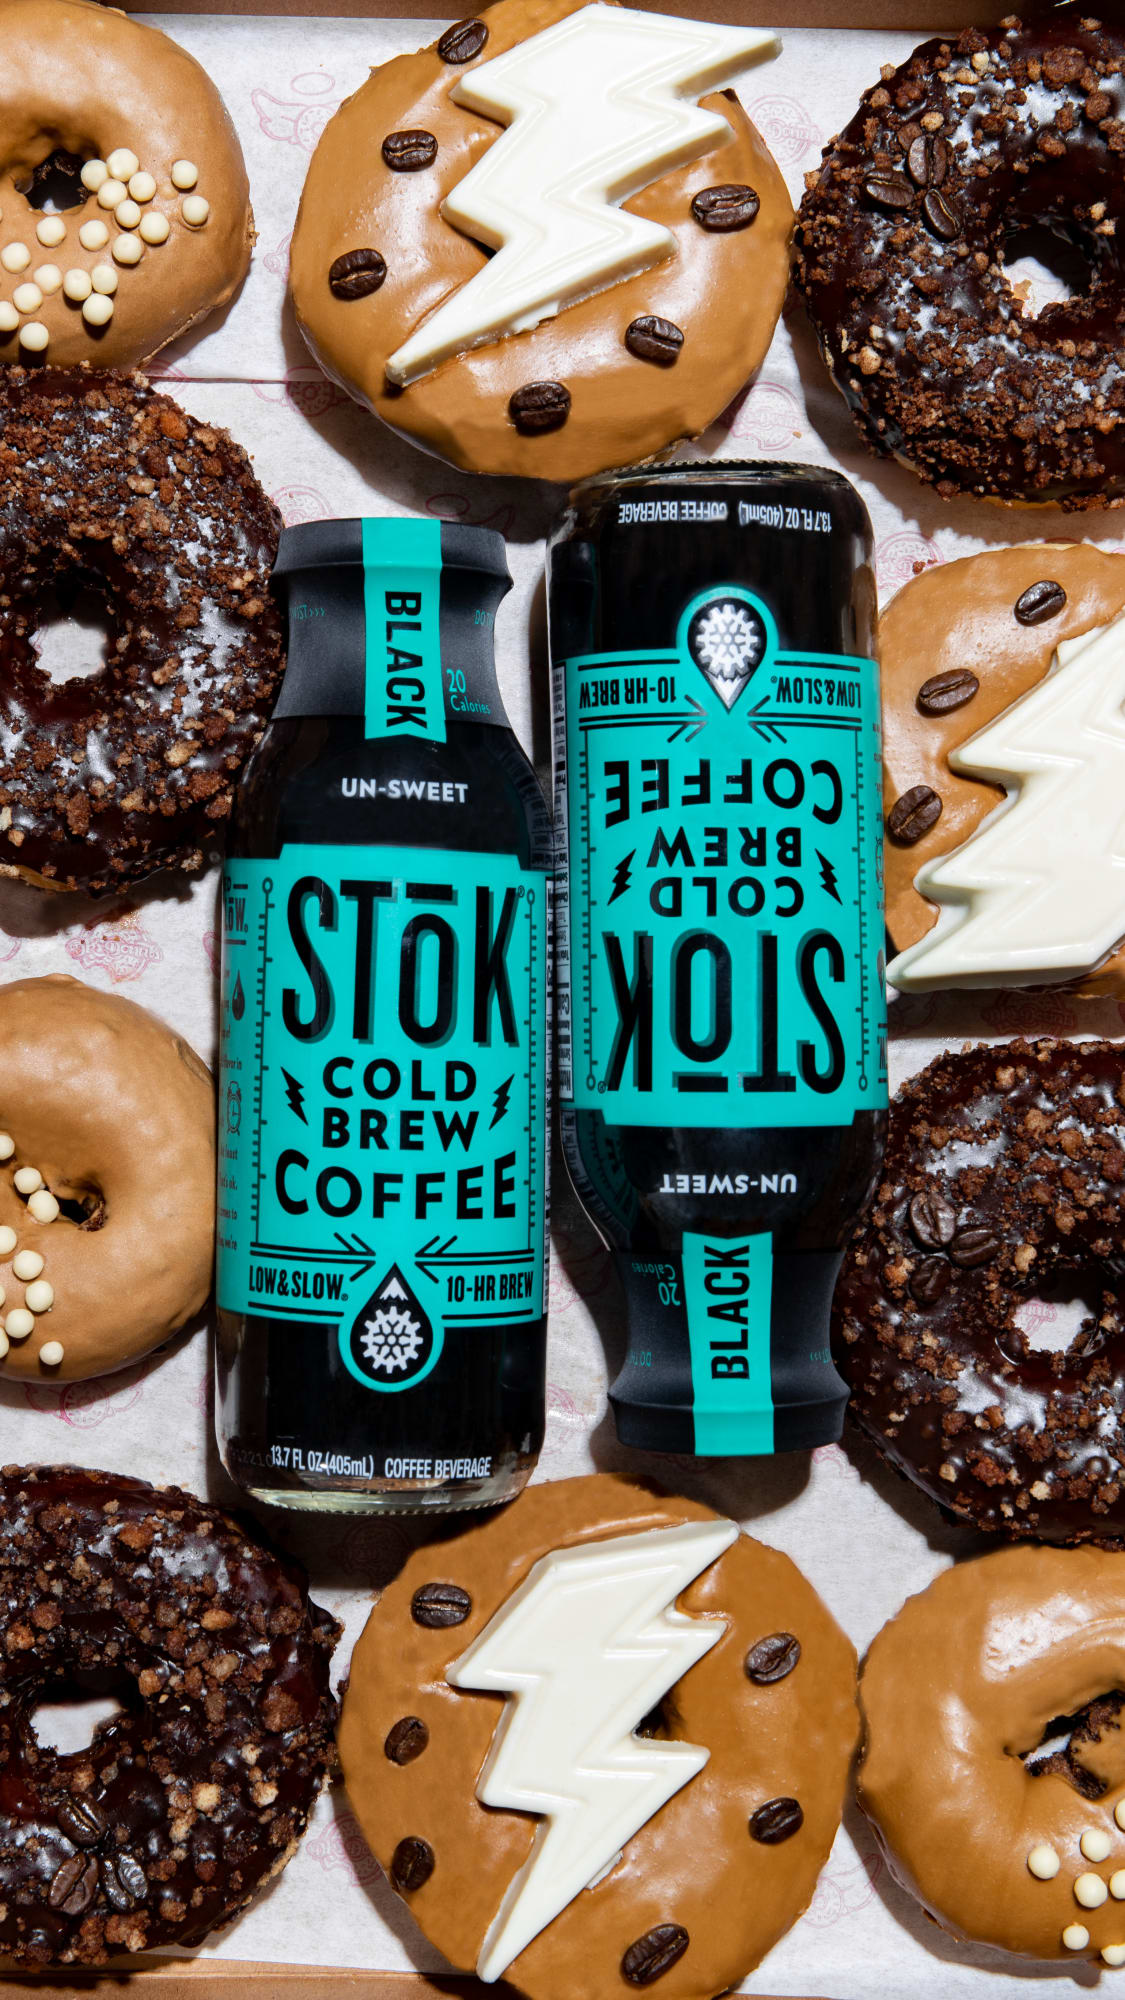 Celebrate National Cold Brew Coffee Day with STōK awake and bake